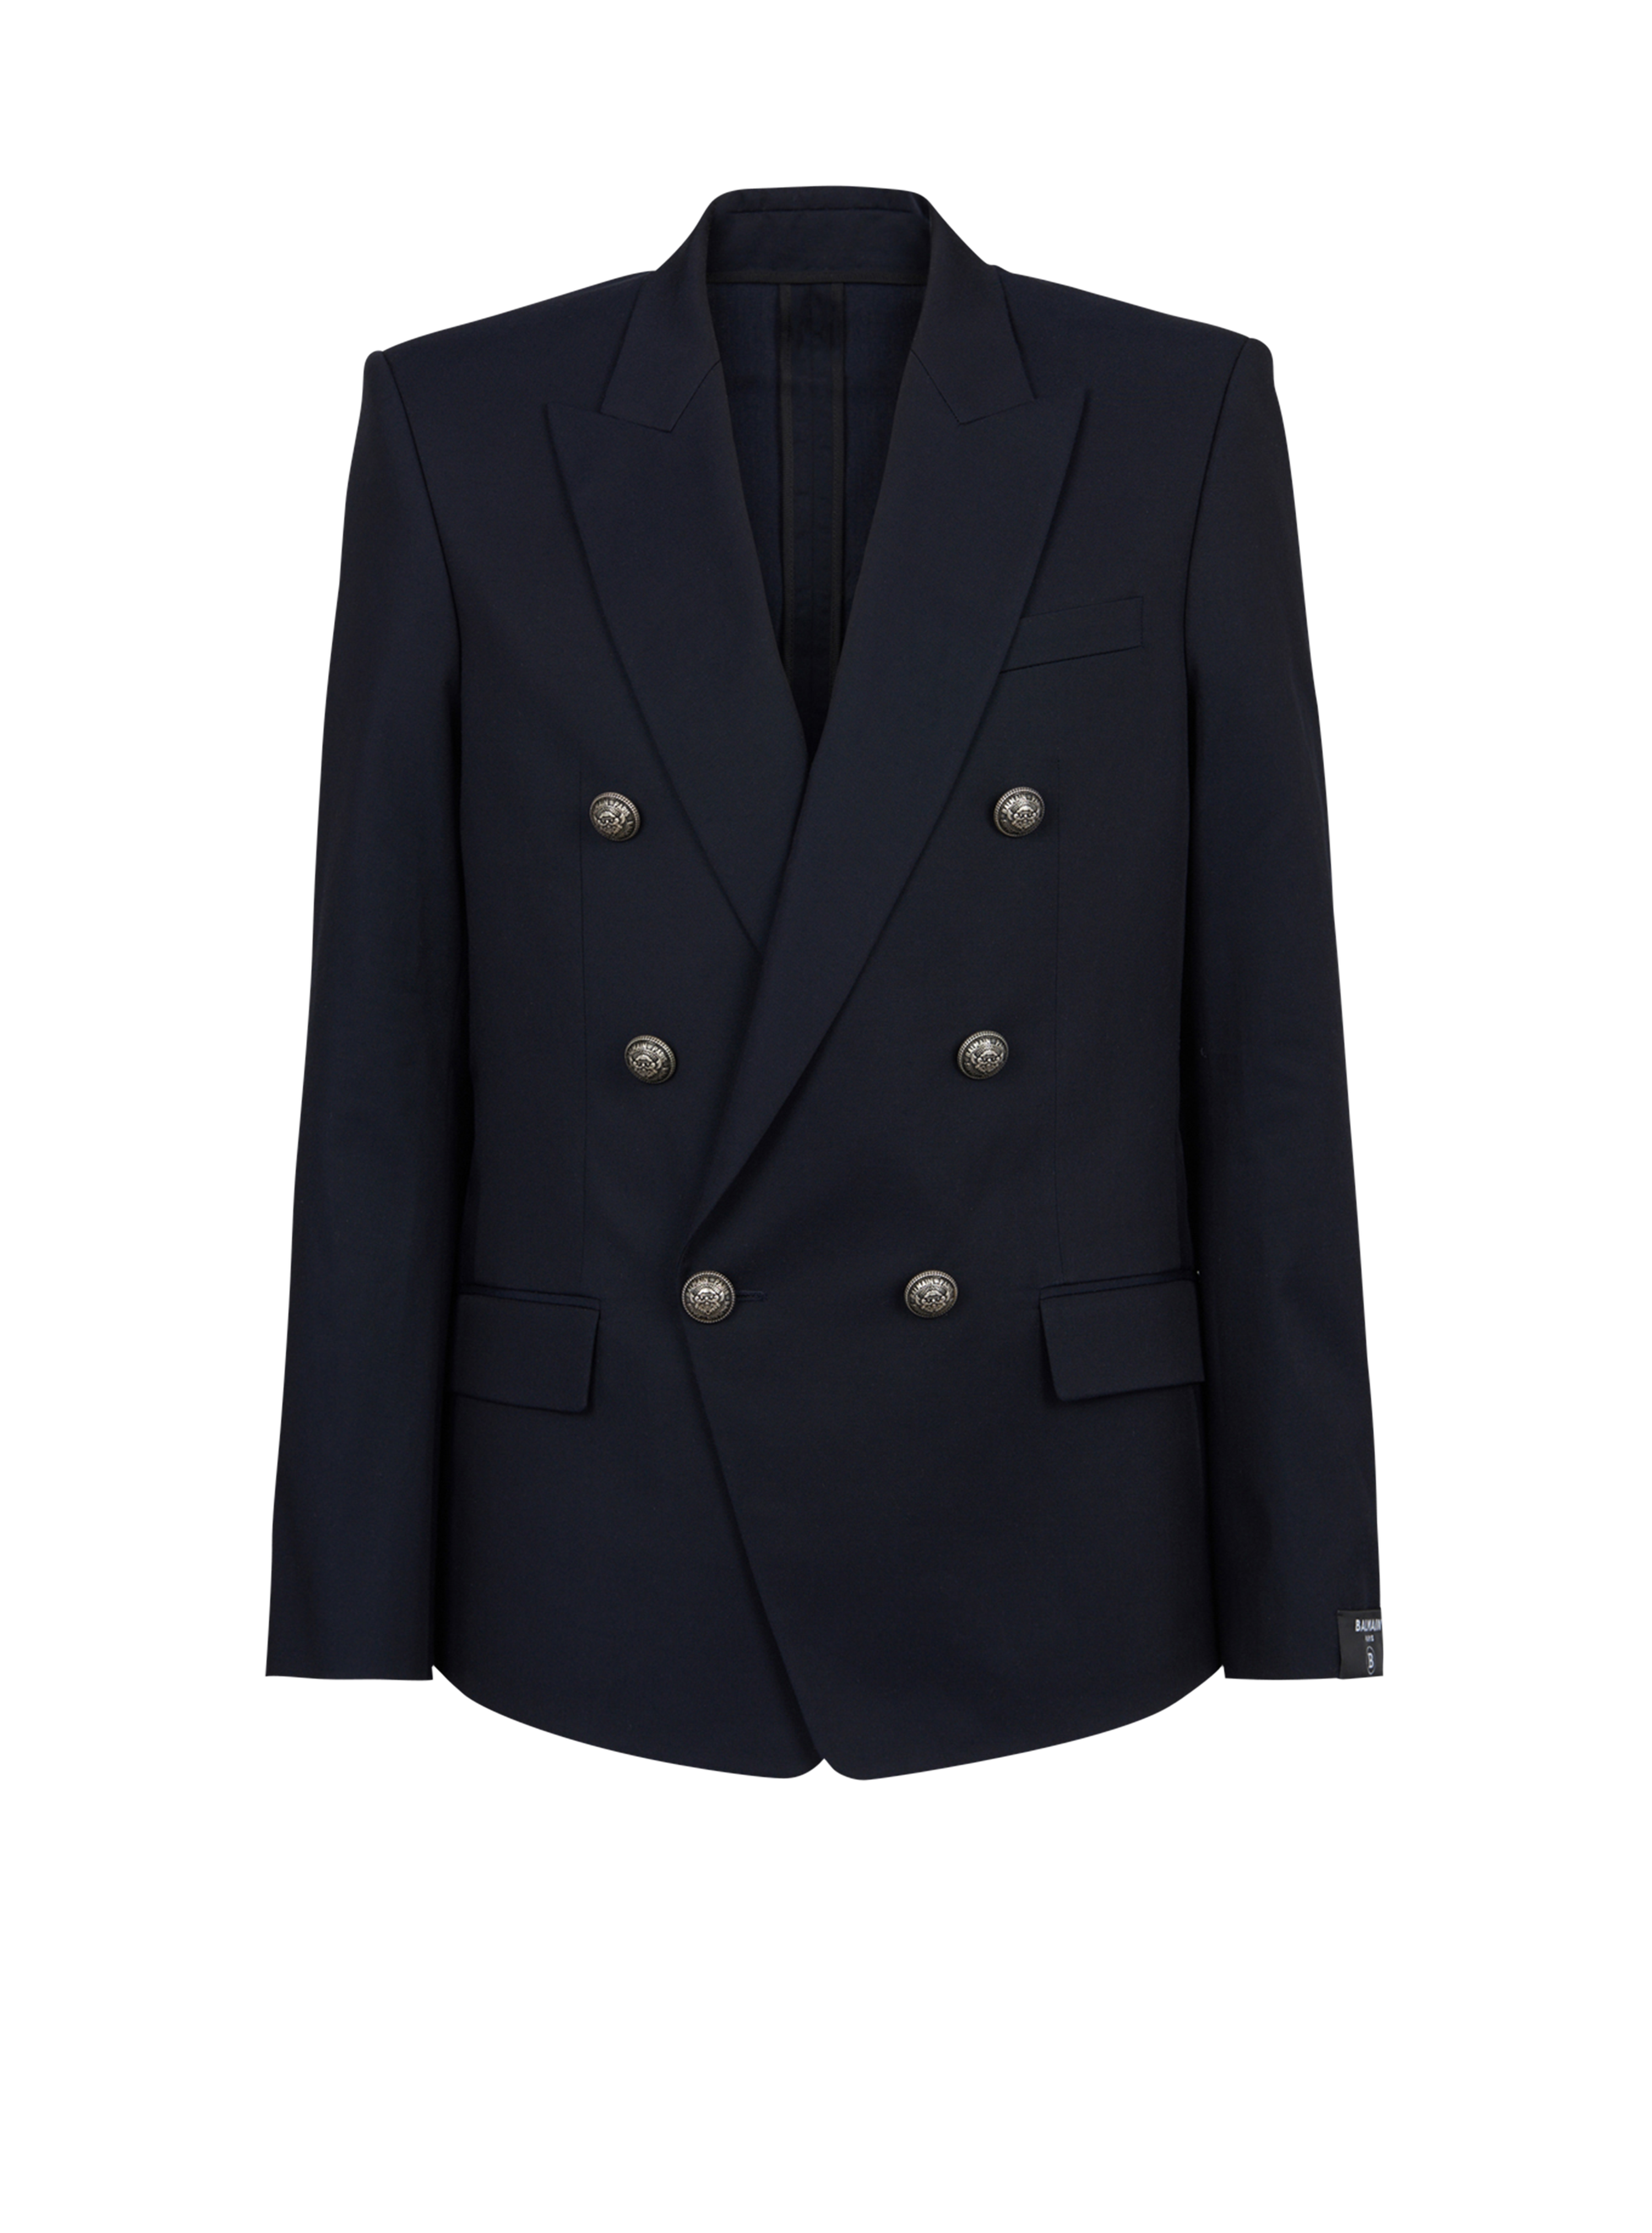 Cotton blazer with double-breasted silver-tone buttoned fastening, navy